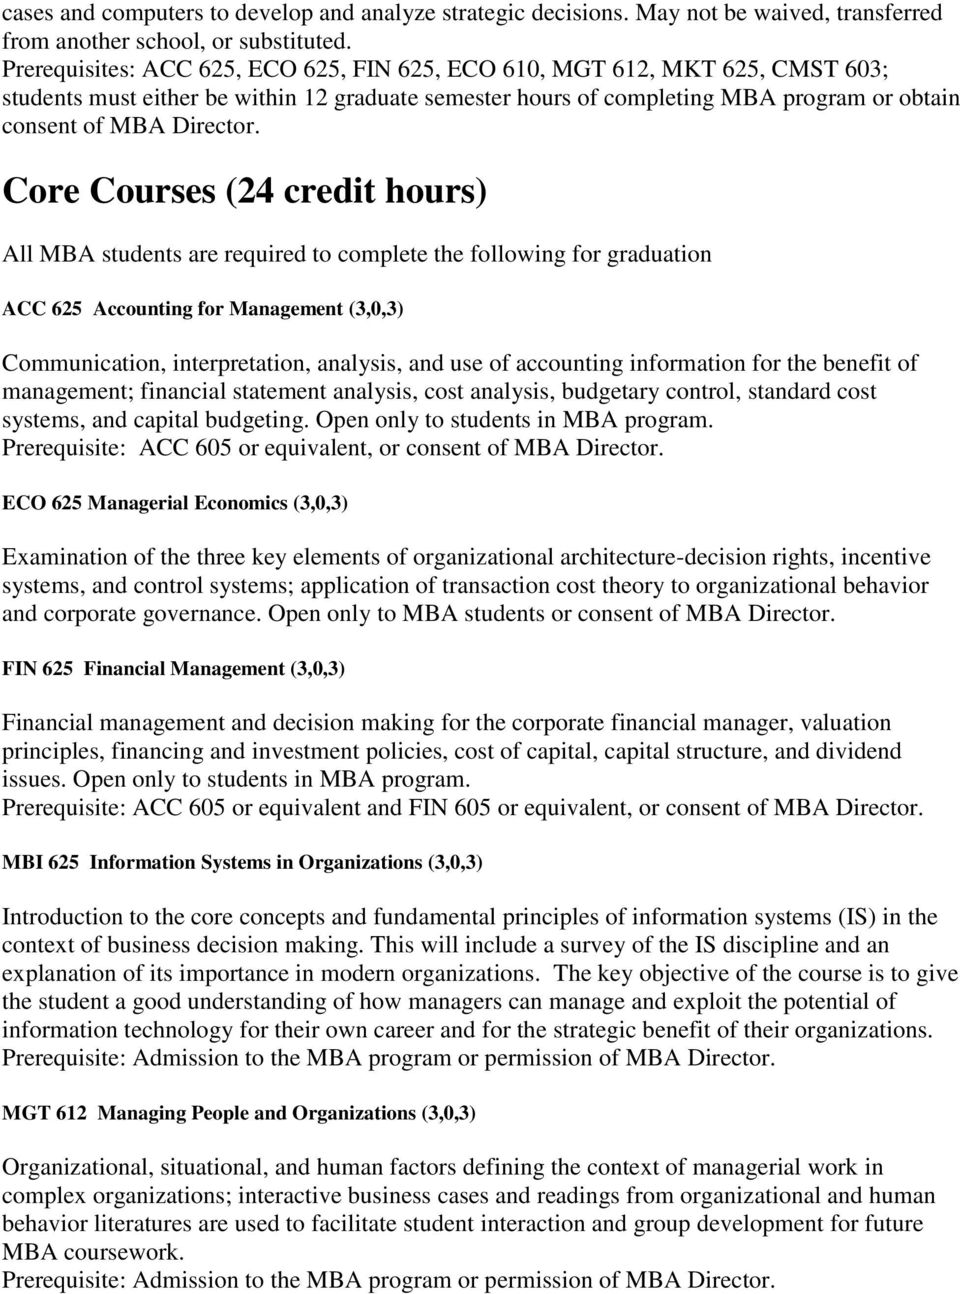 Core Courses (24 credit hours) All MBA students are required to complete the following for graduation ACC 625 Accounting for Management (3,0,3) Communication, interpretation, analysis, and use of